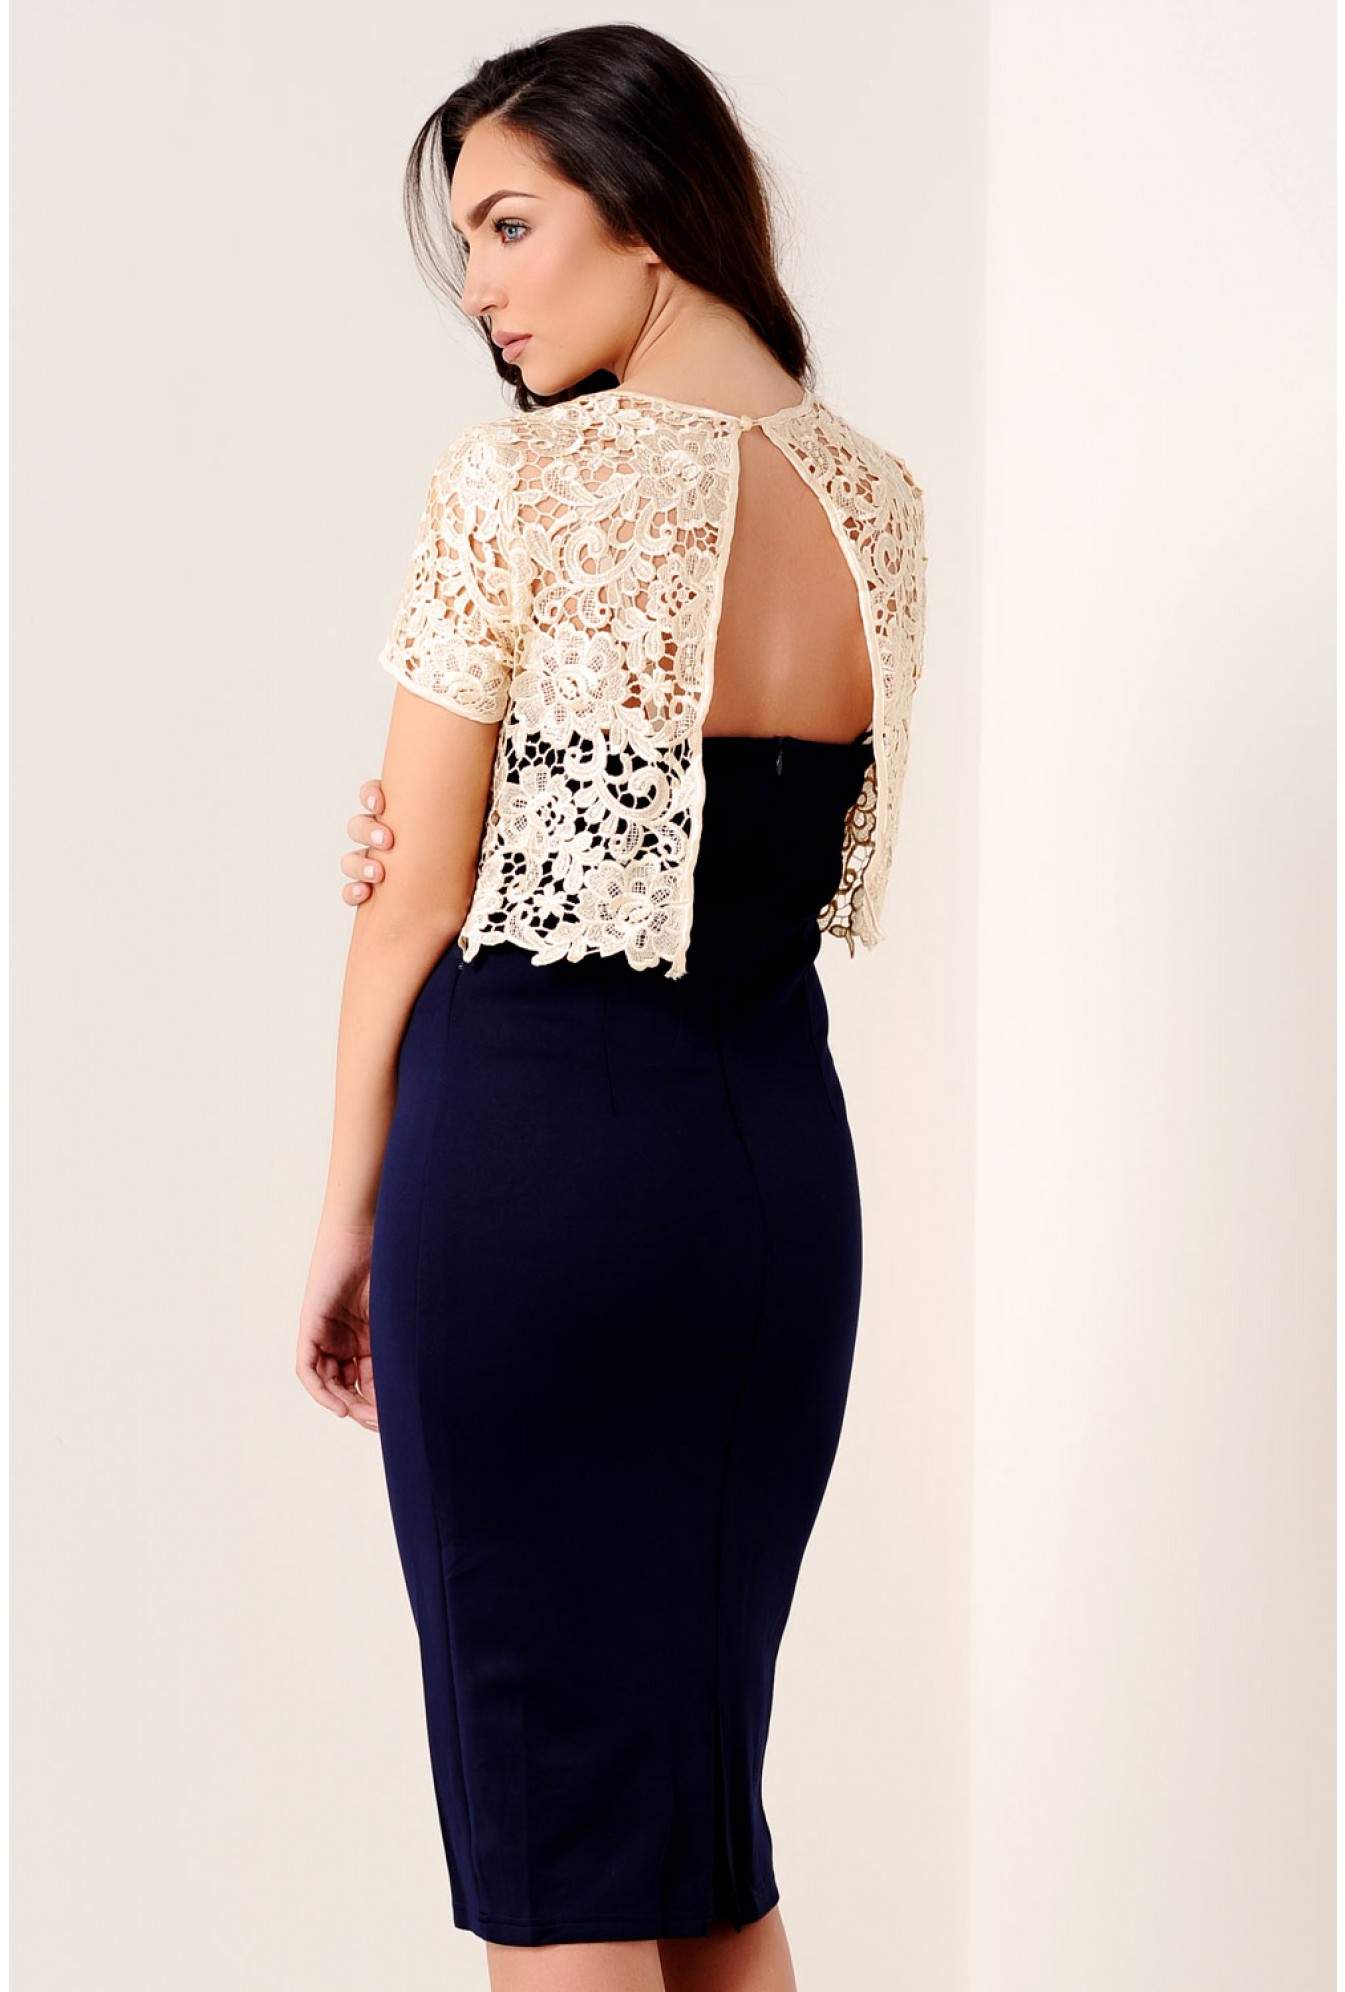 iCLOTHING Blythe Lace Overlay Dress in Navy | iCLOTHING